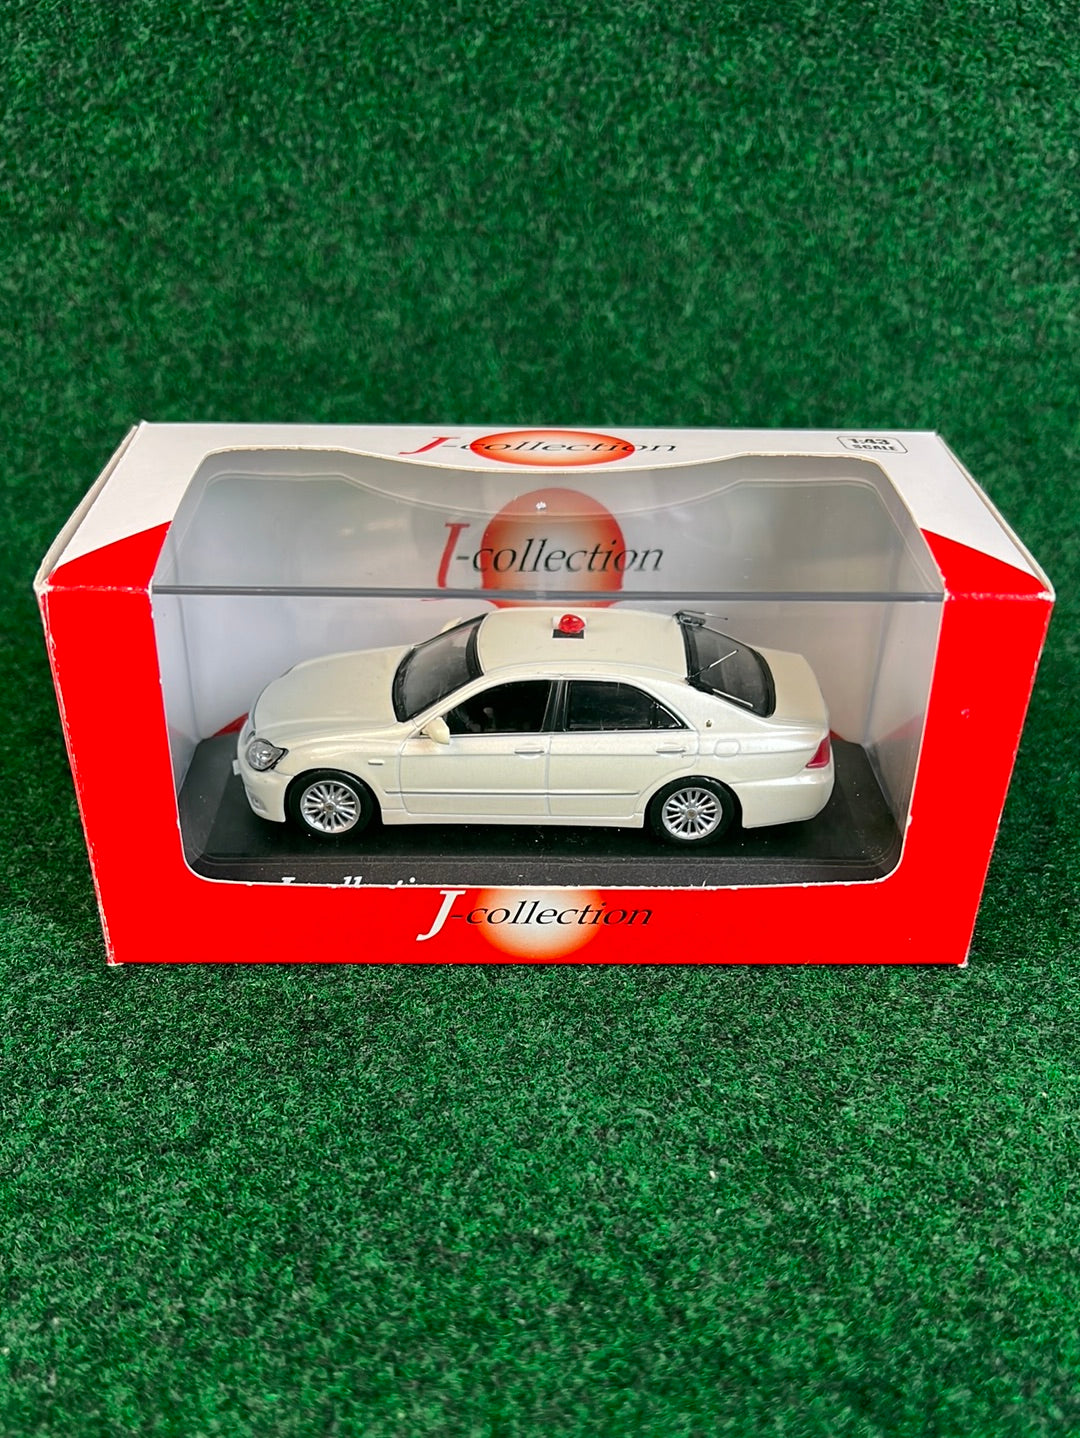 J-Collection (KYOSHO) 2005 Toyota Crown Royal Modified 1/43 Scale Diecast